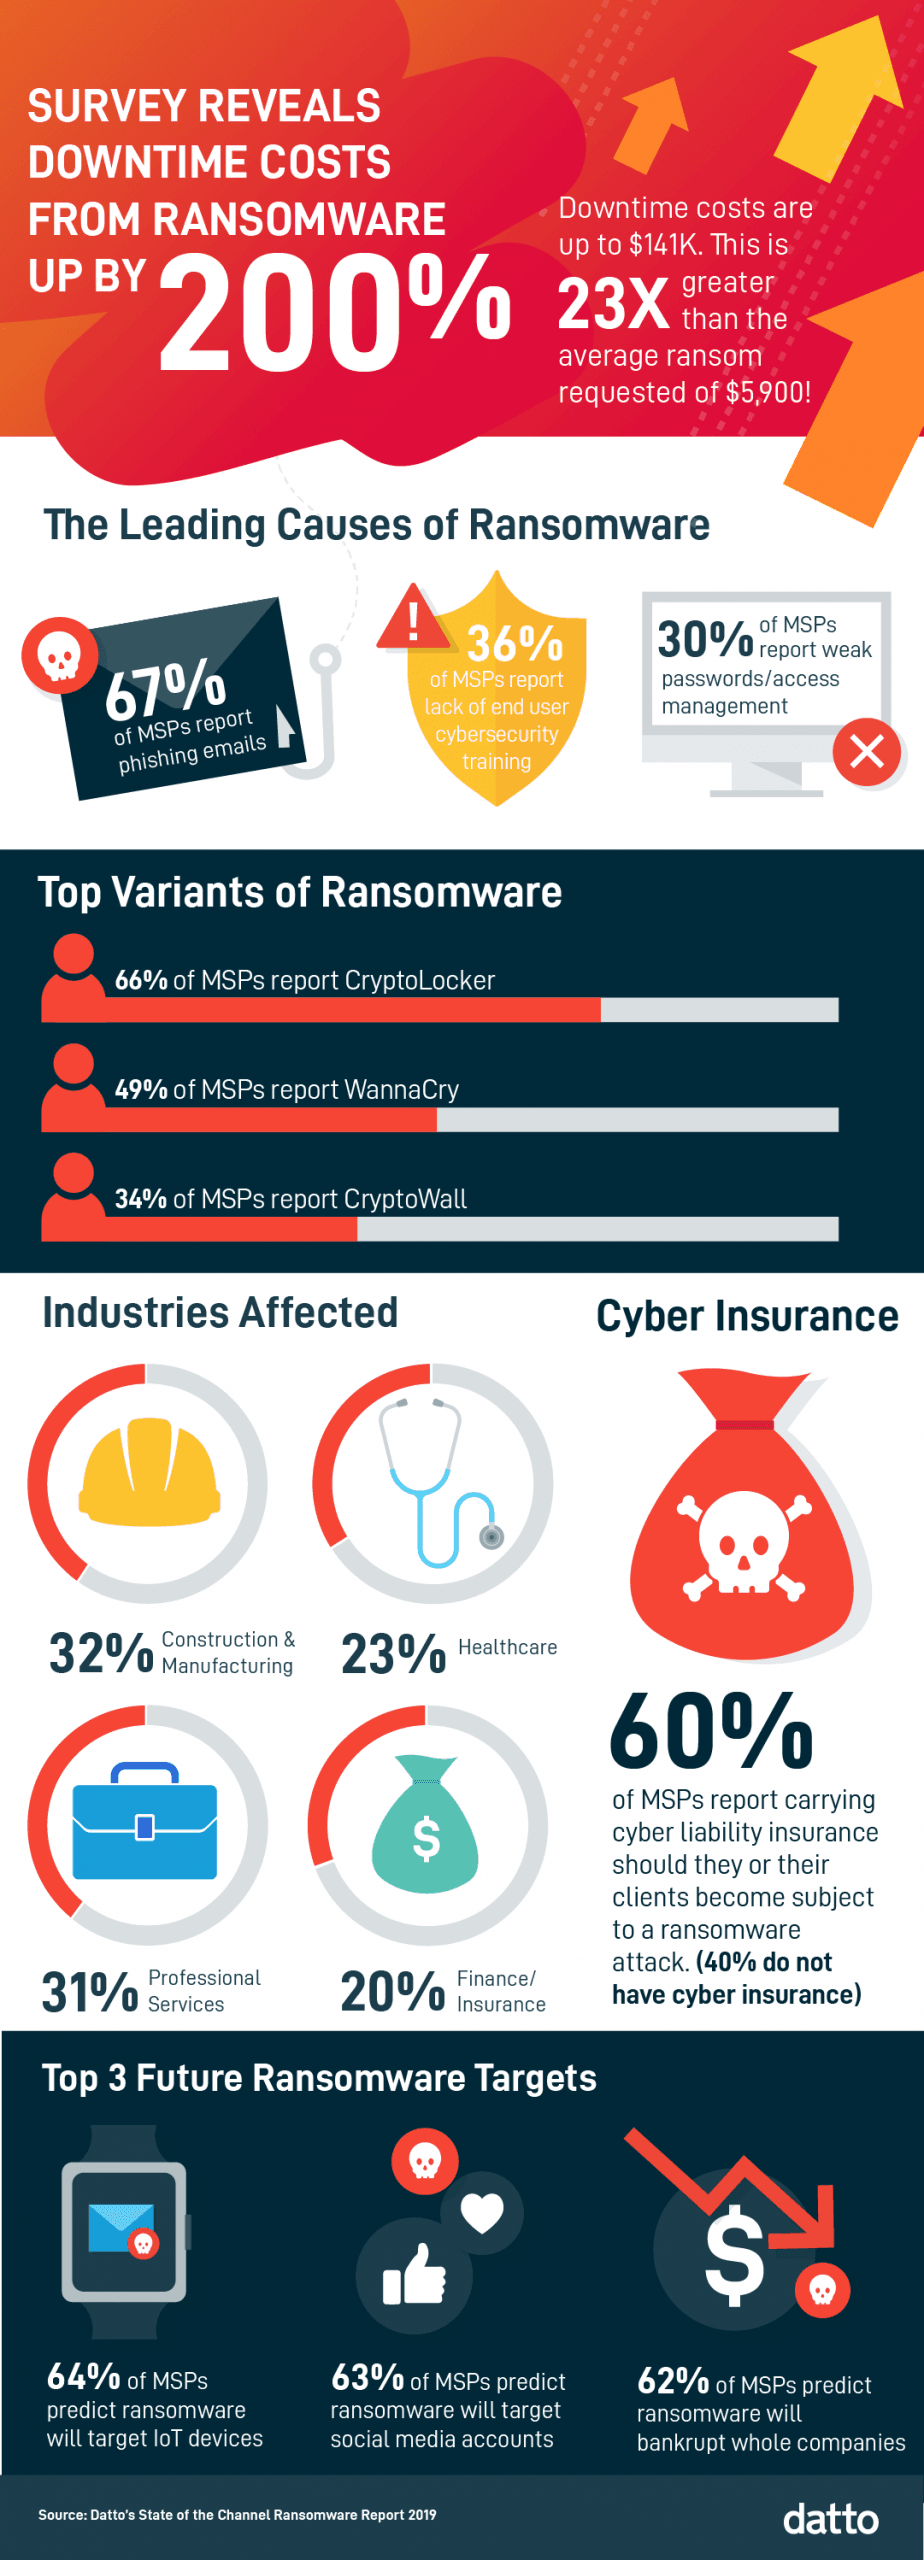 Datto2019 RansomwareReport ForPress3 02 02 scaled